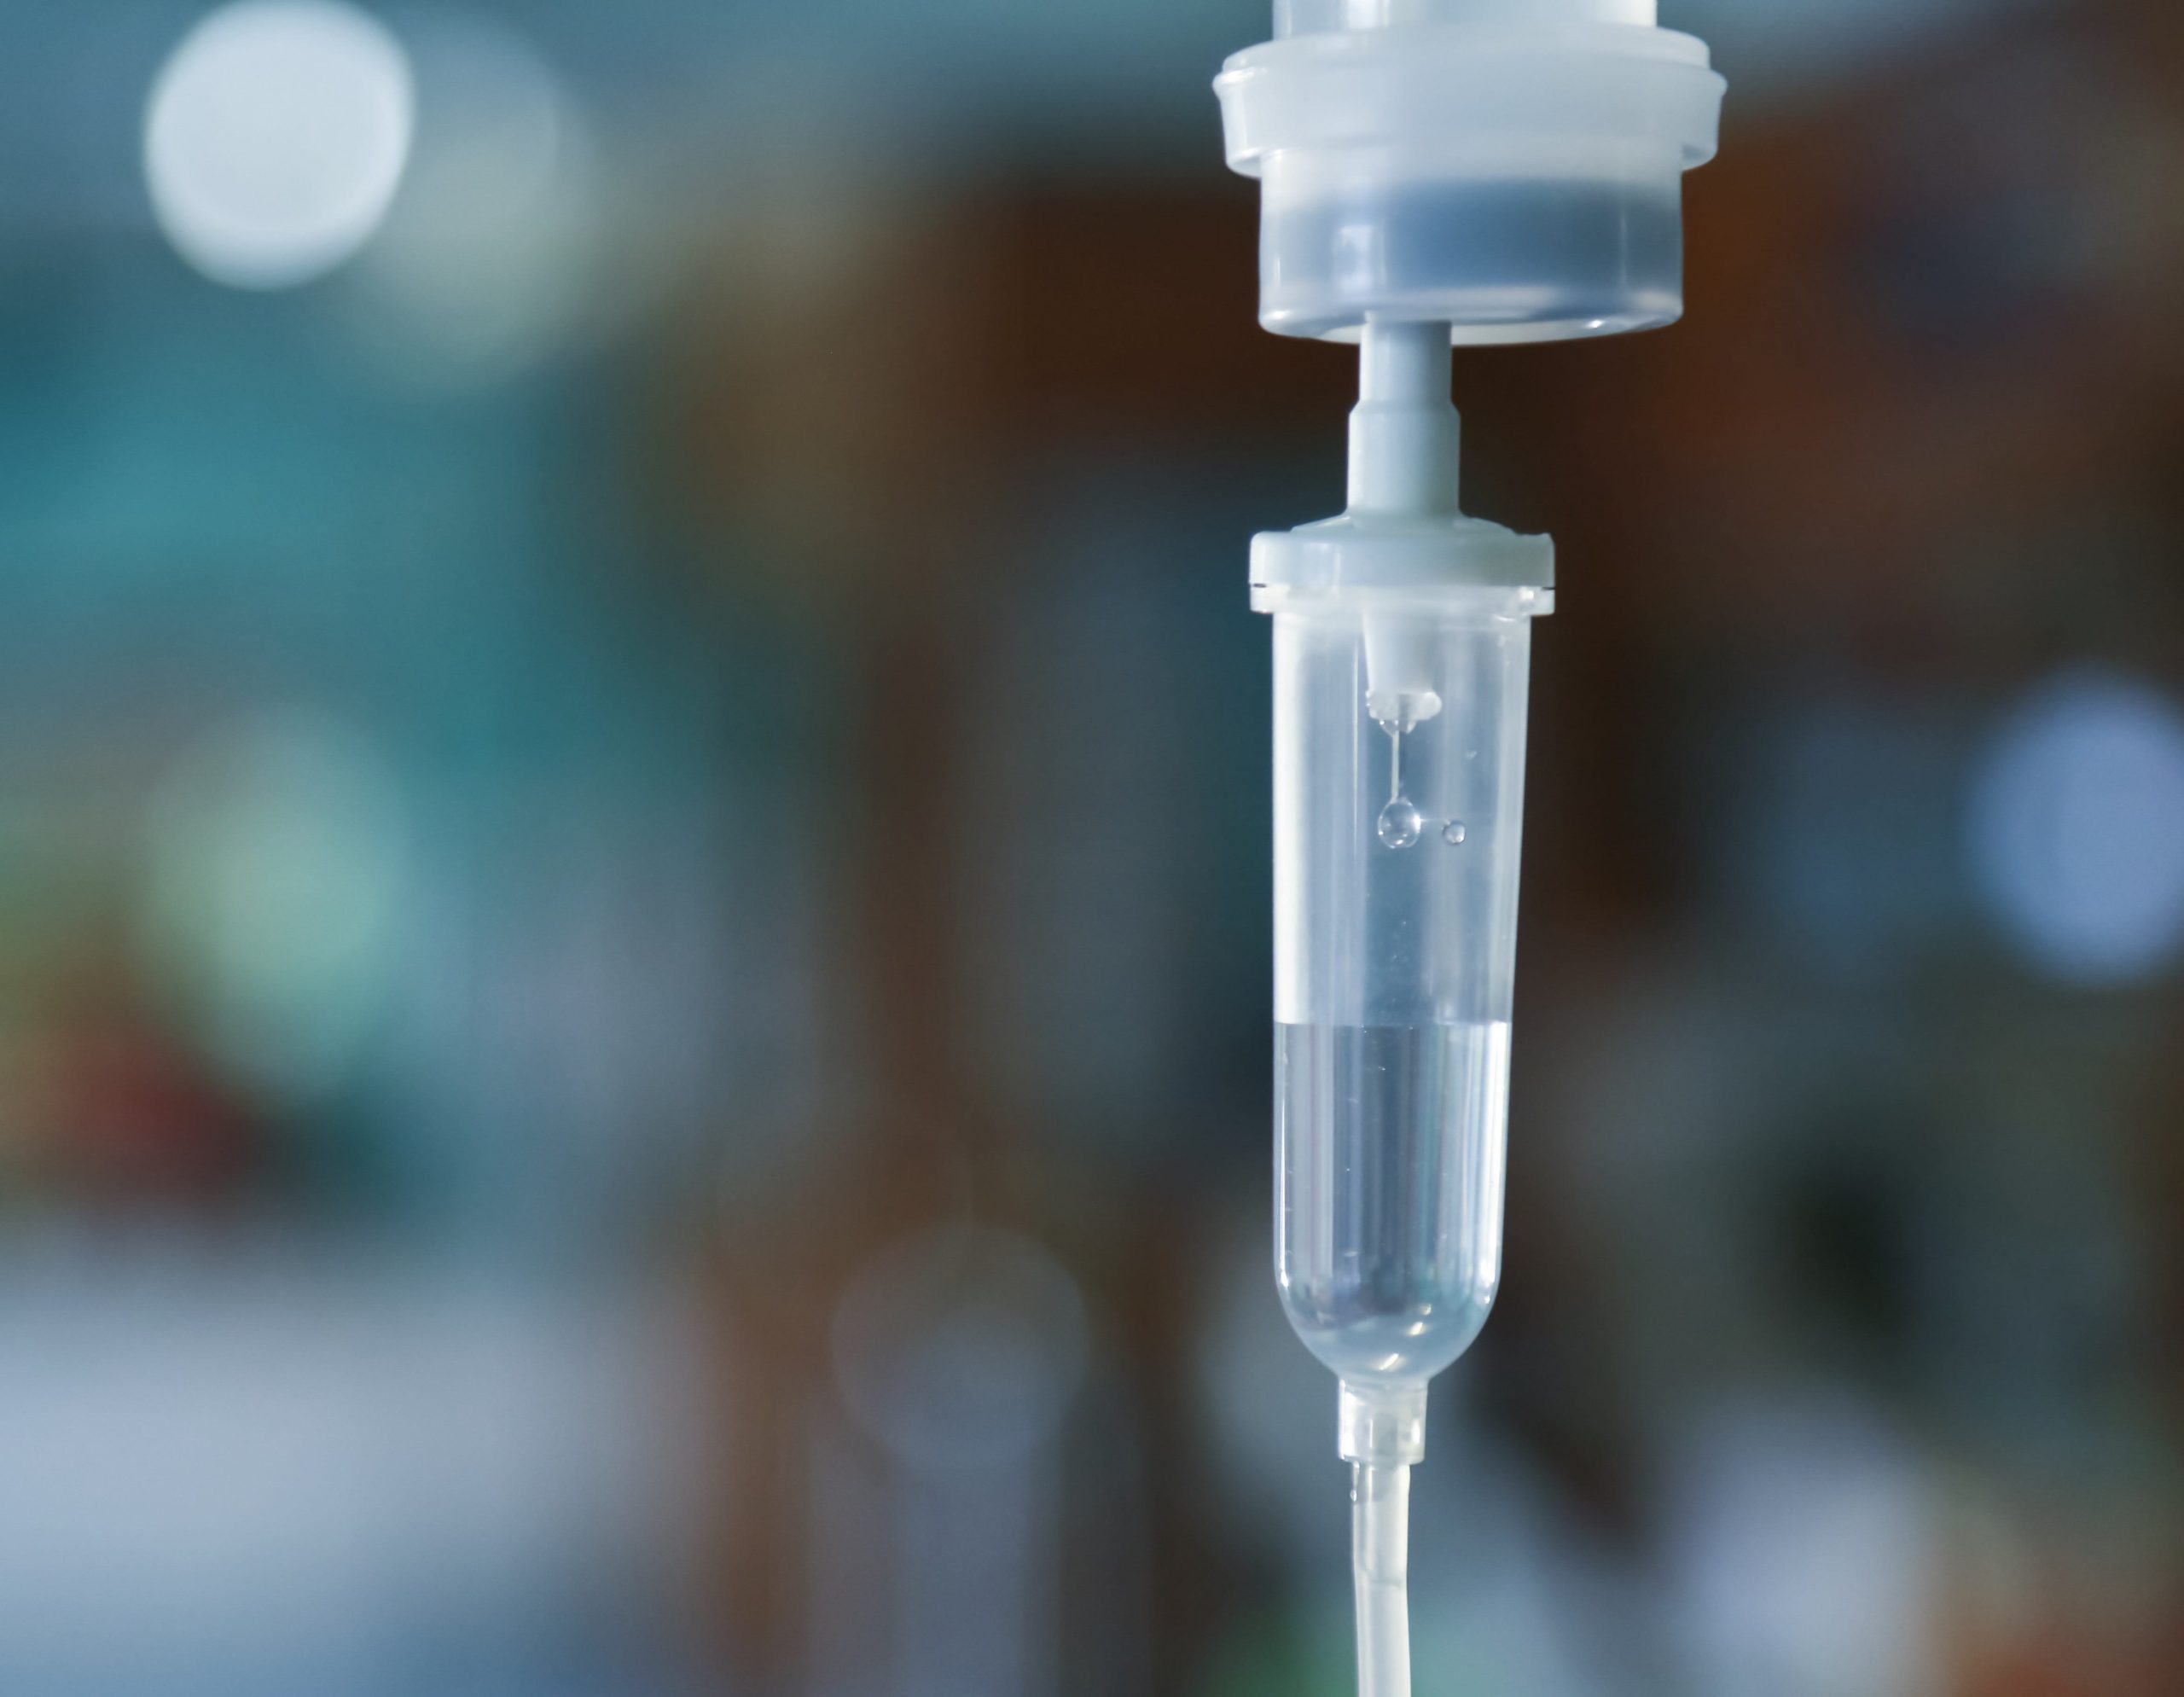 Suburban nurse who stole morphine from patients sentenced [Video]